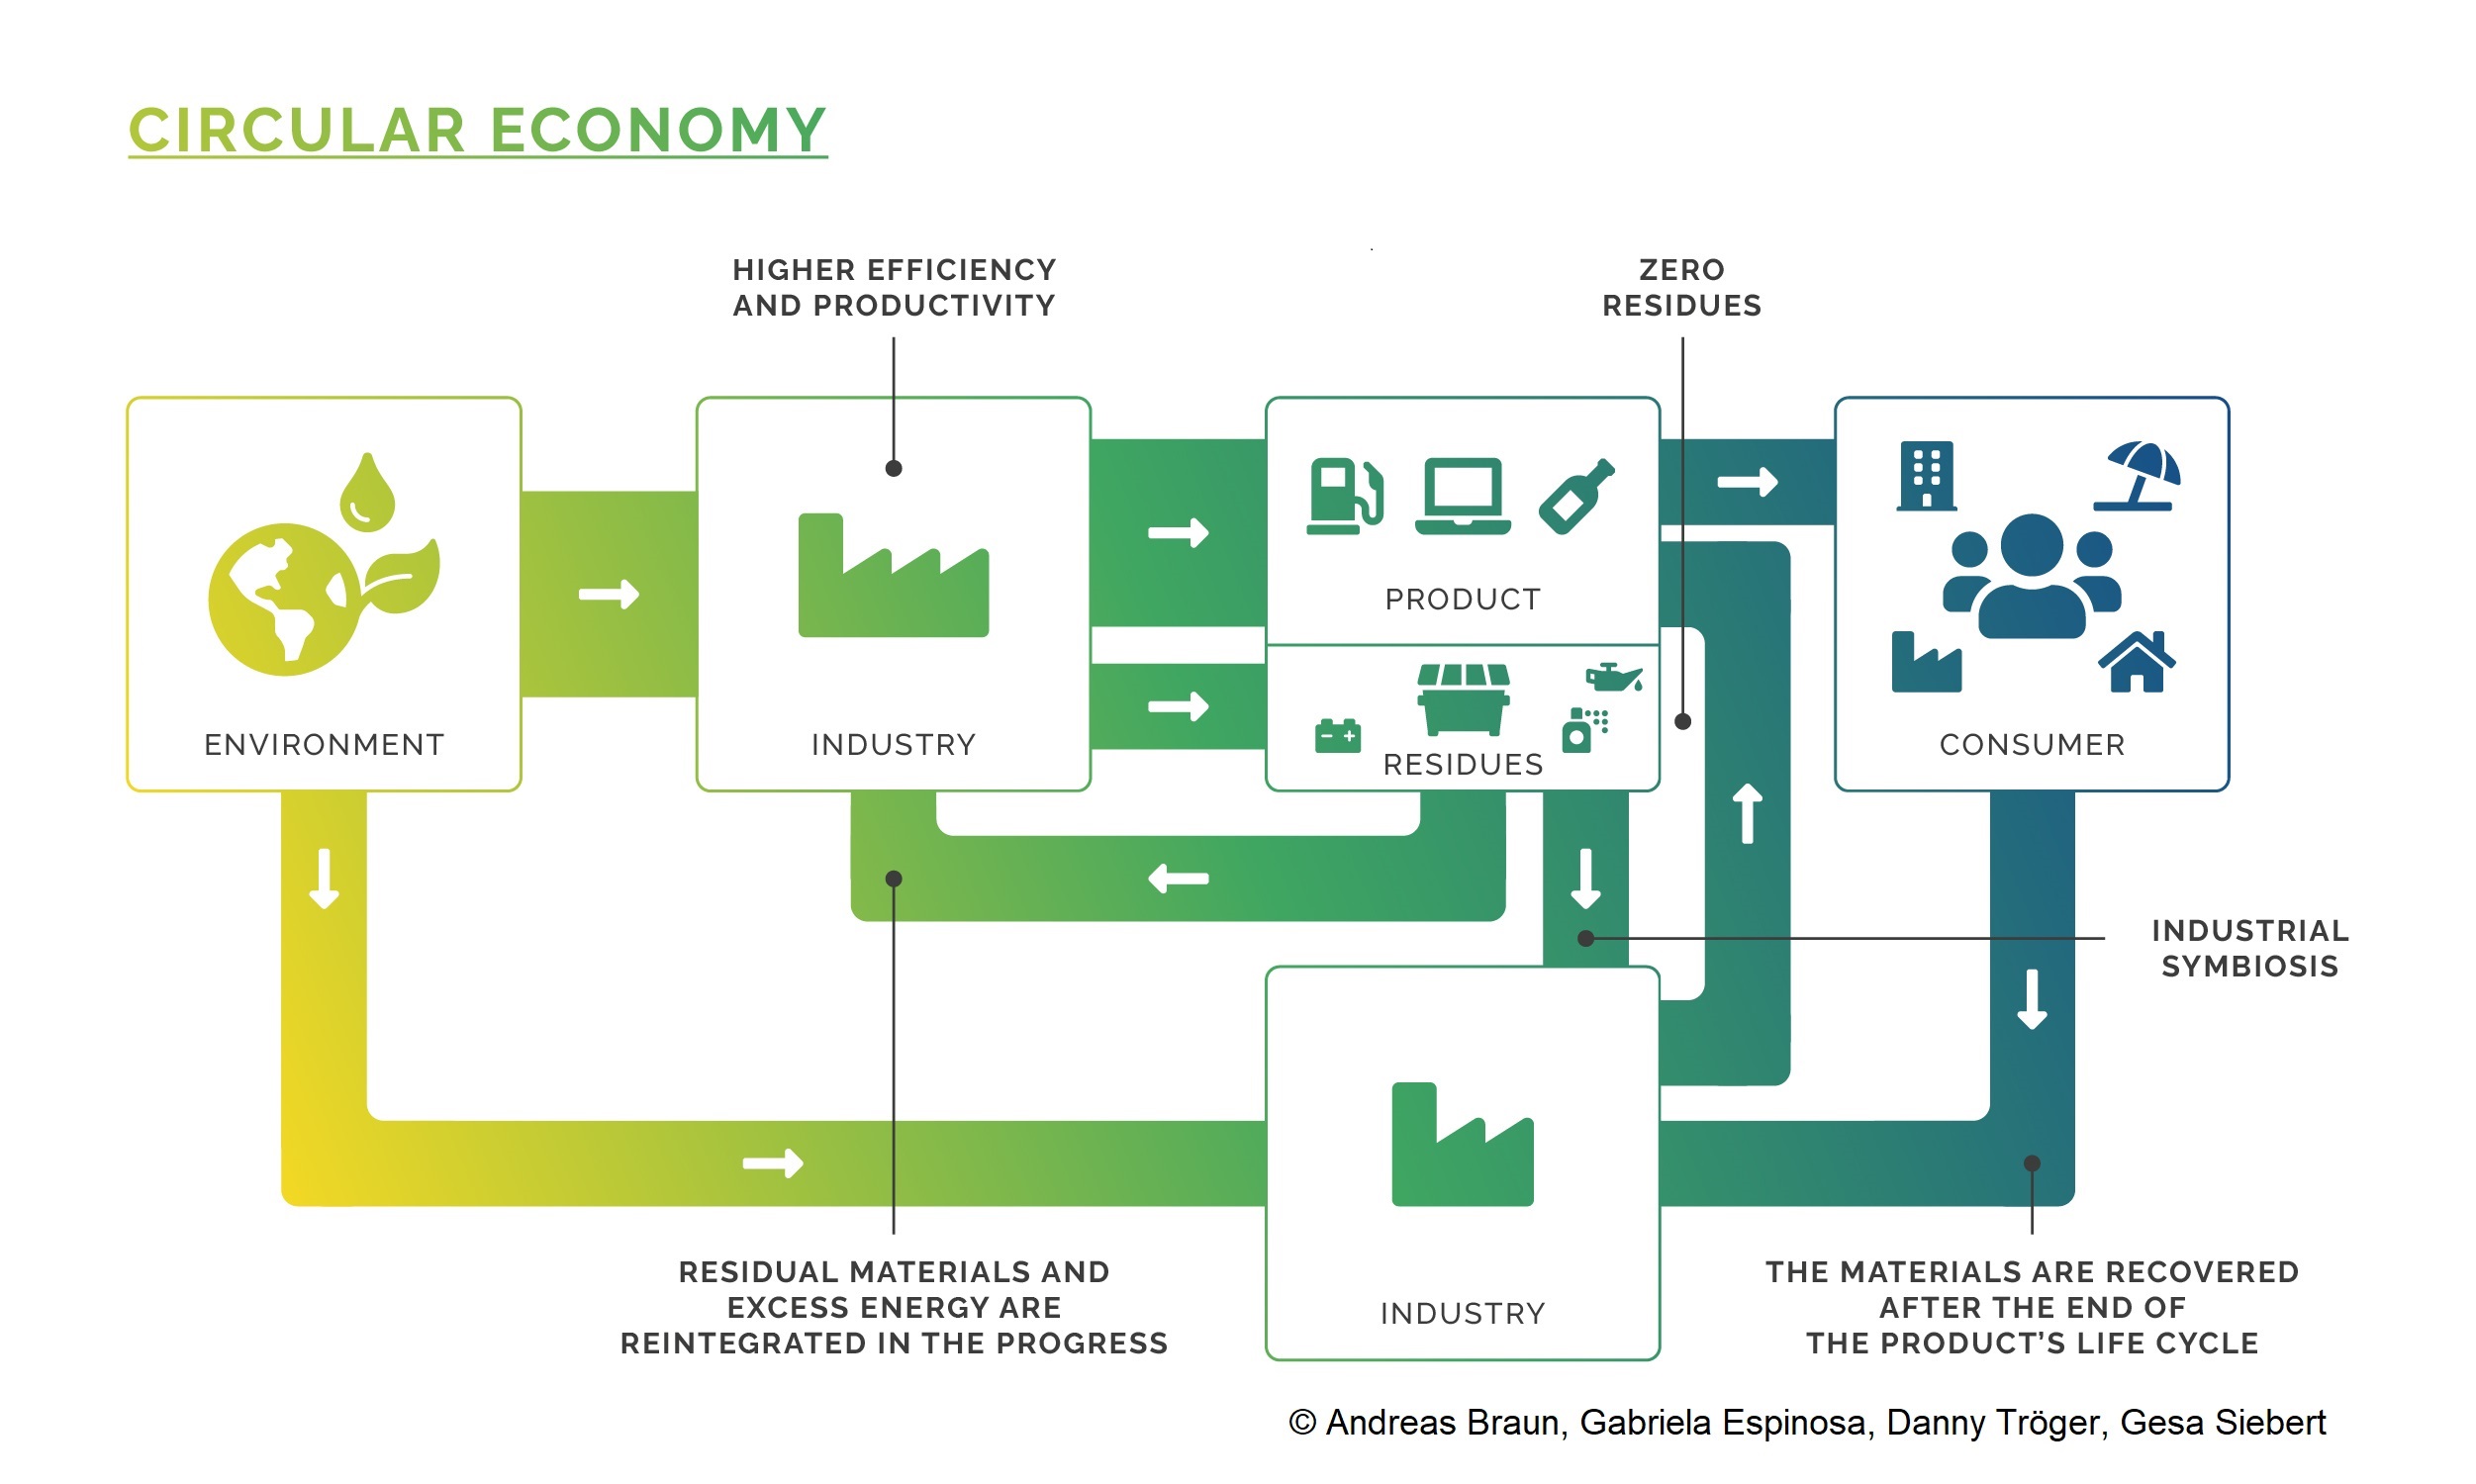 Figure 2: Ideal production style according to eco-industrial principles. The result is a circular economy that is sustainable.